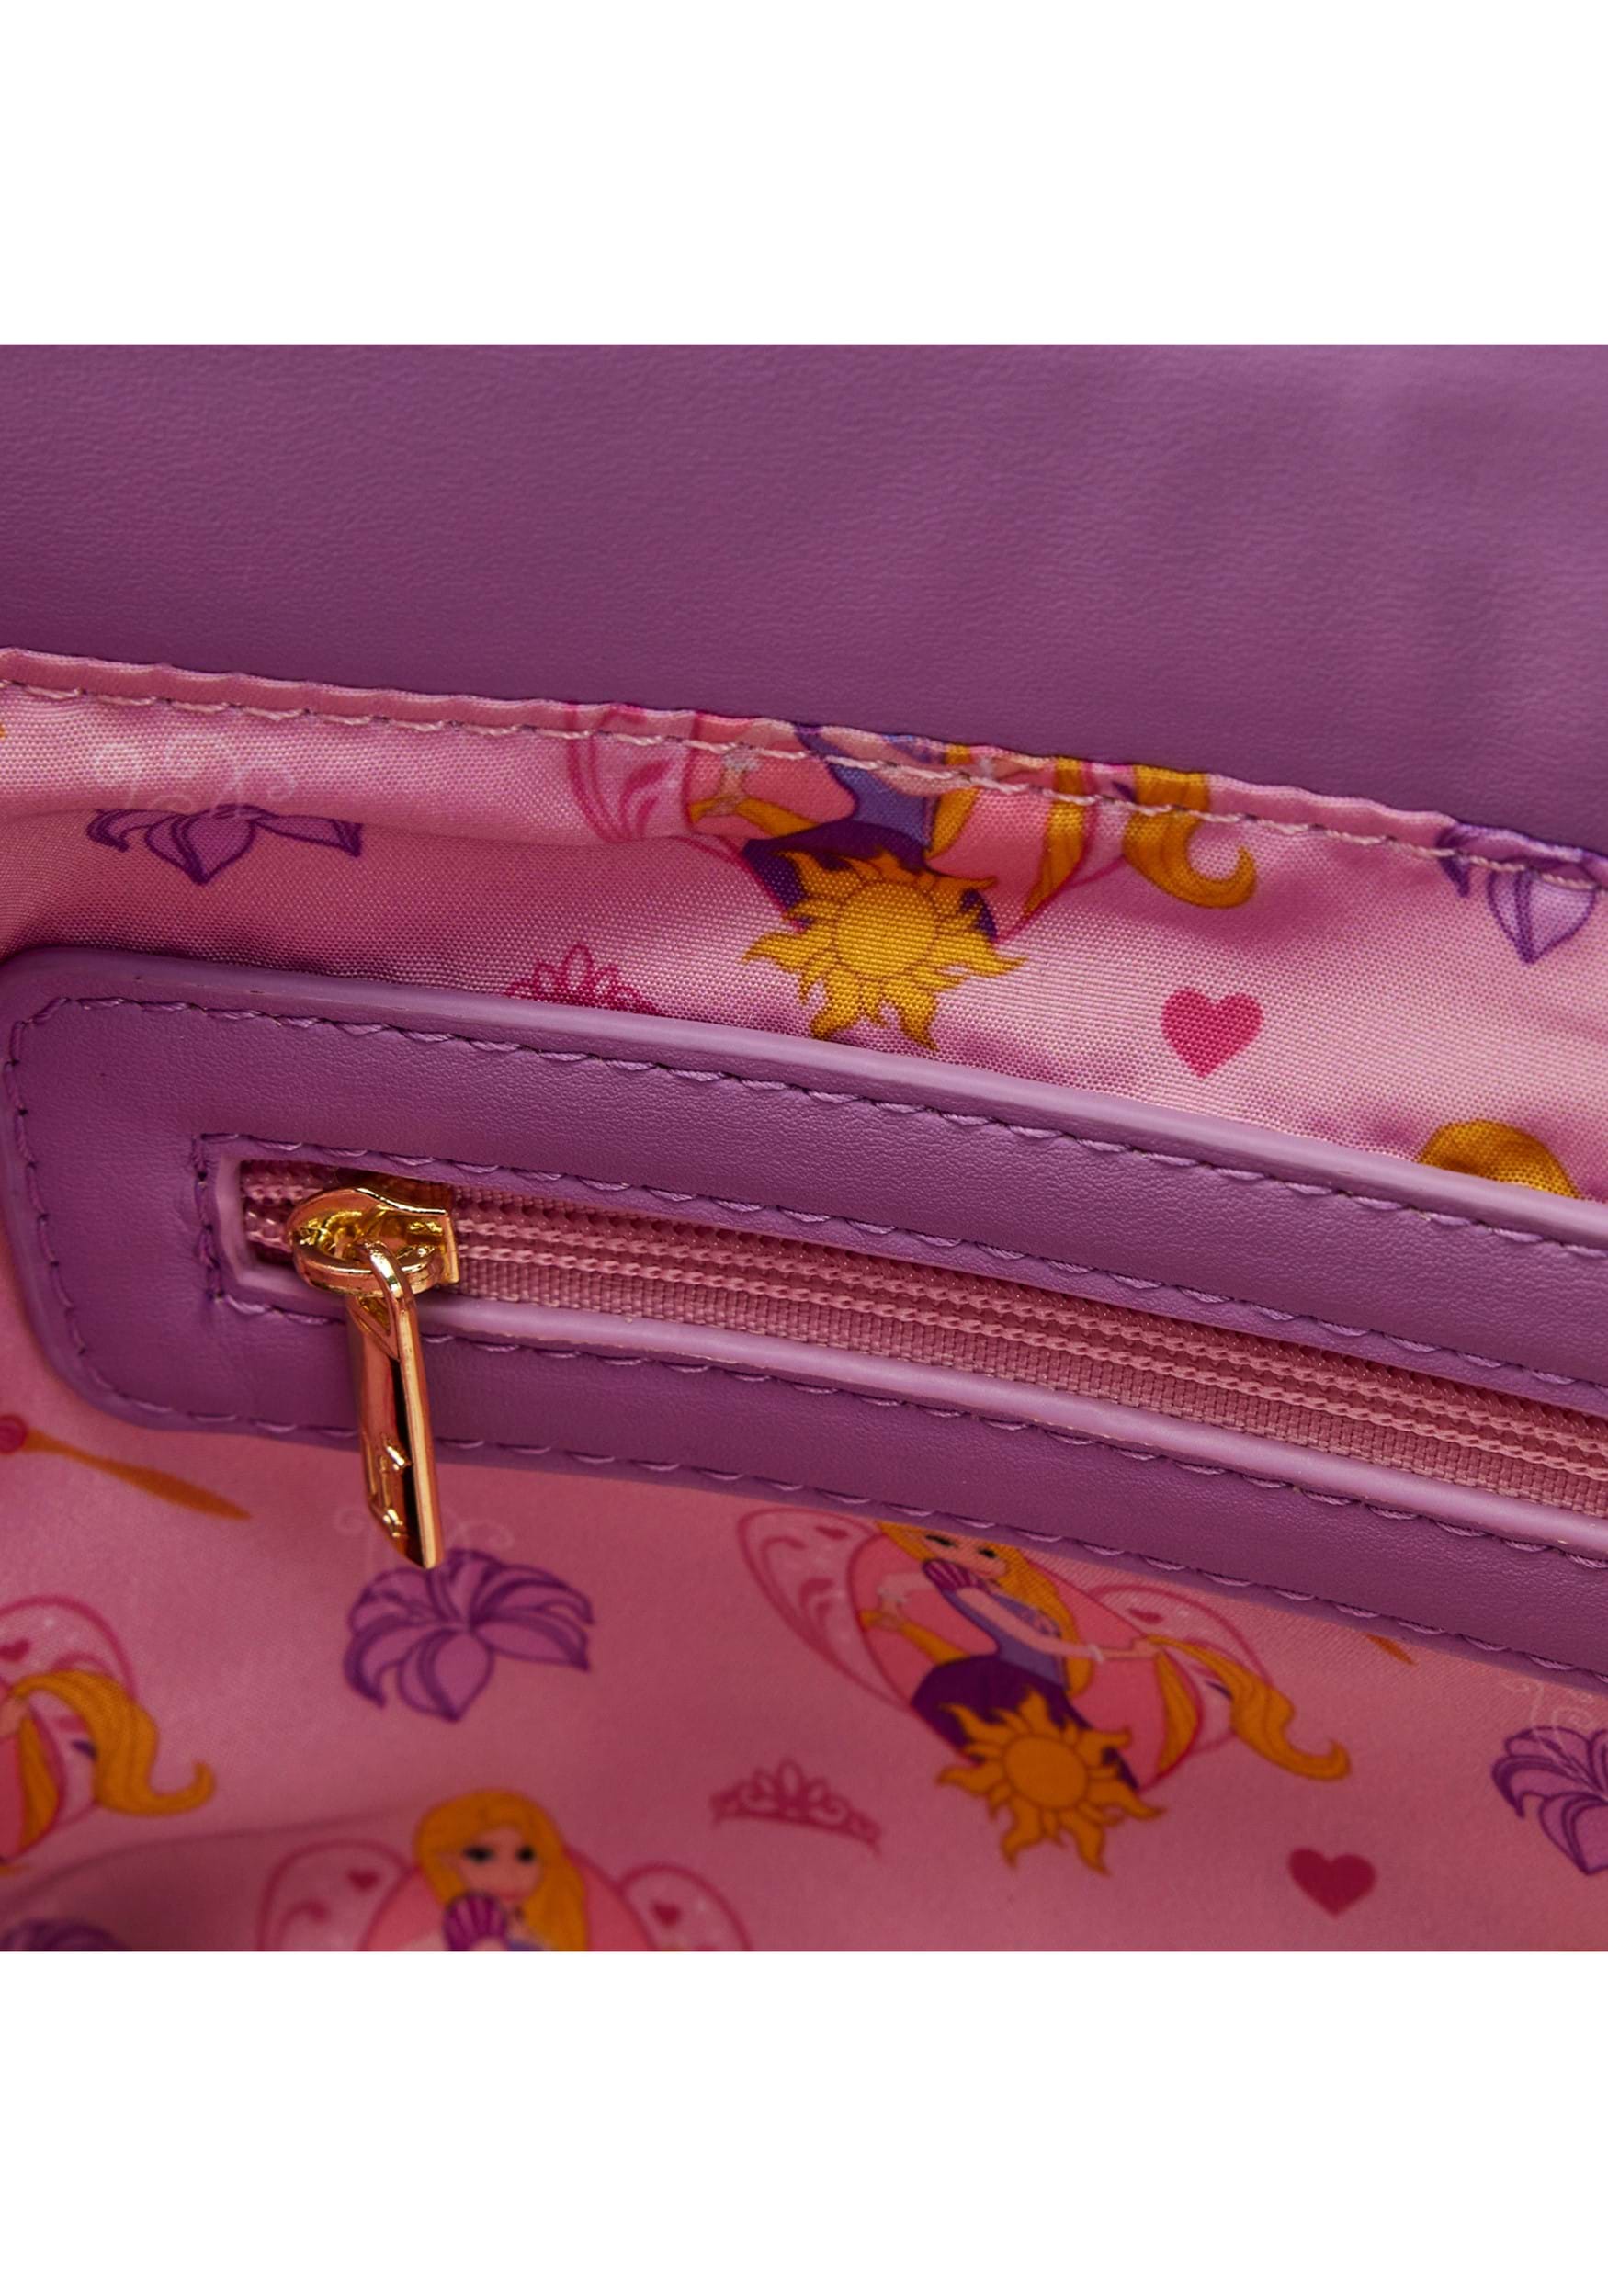 SOFIA THE FIRST Girls Childrens Coin Purse pocket money CLEARANCE NEW | eBay